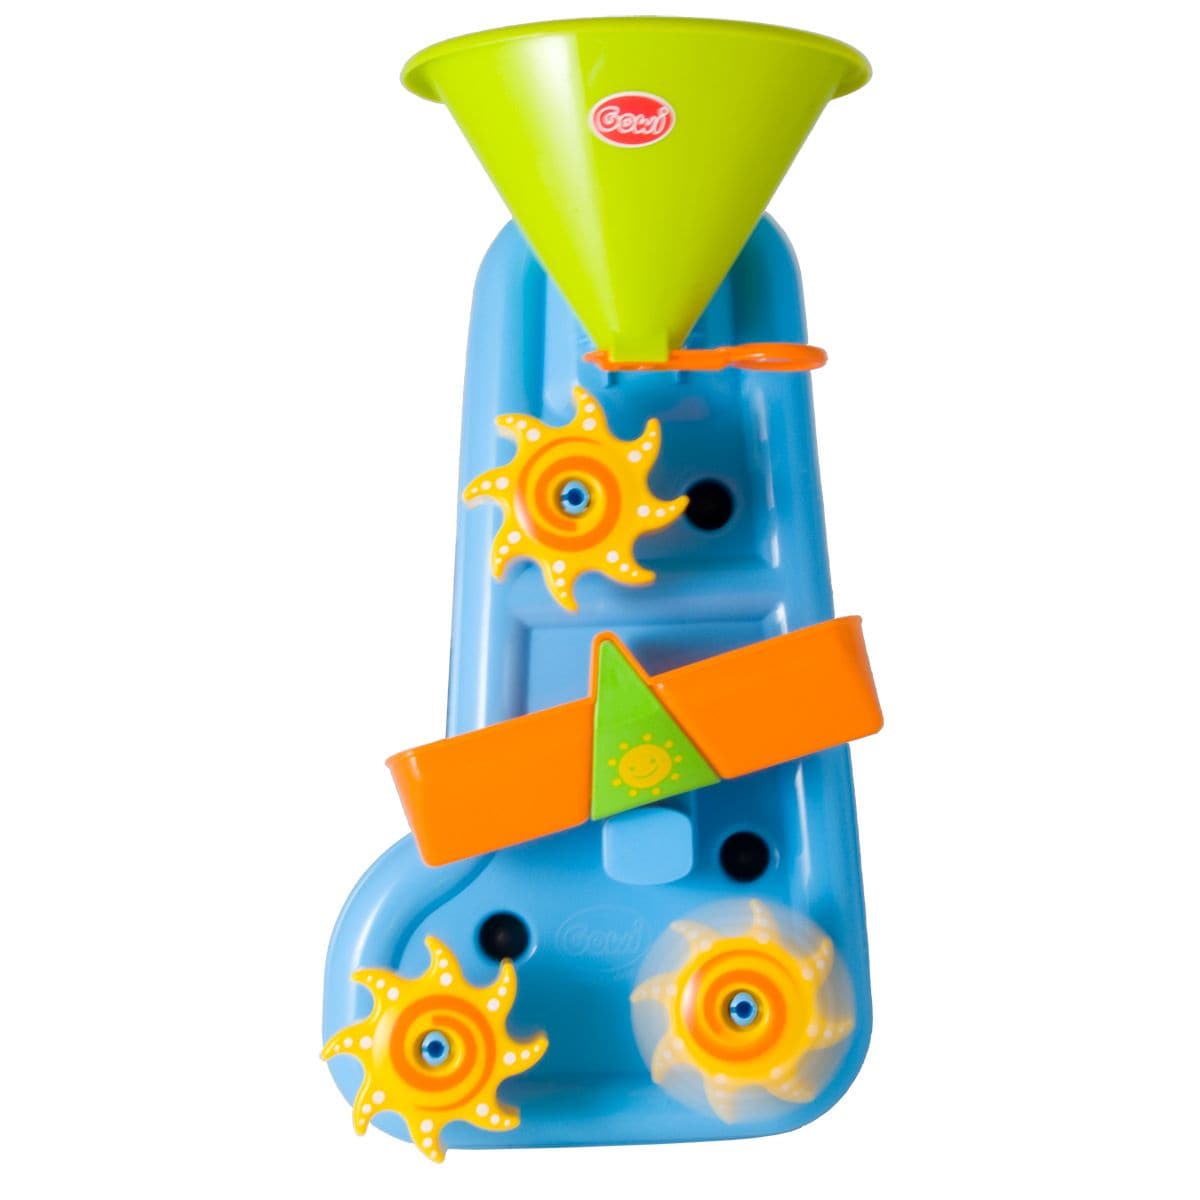 Bath Water Wheel, Make bath time a delightful adventure with the Bath Time Watermill. This engaging water toy will keep your little one entertained as they pour water into the funnel and watch the magic unfold. It's designed to make bath time not only fun but also a great learning experience. Colorful Cogs and Spinning Wheels: The Bath Time Watermill features brightly colored cogs and spinning wheels that come to life as water flows through them. This visual spectacle is sure to captivate your child's imagi